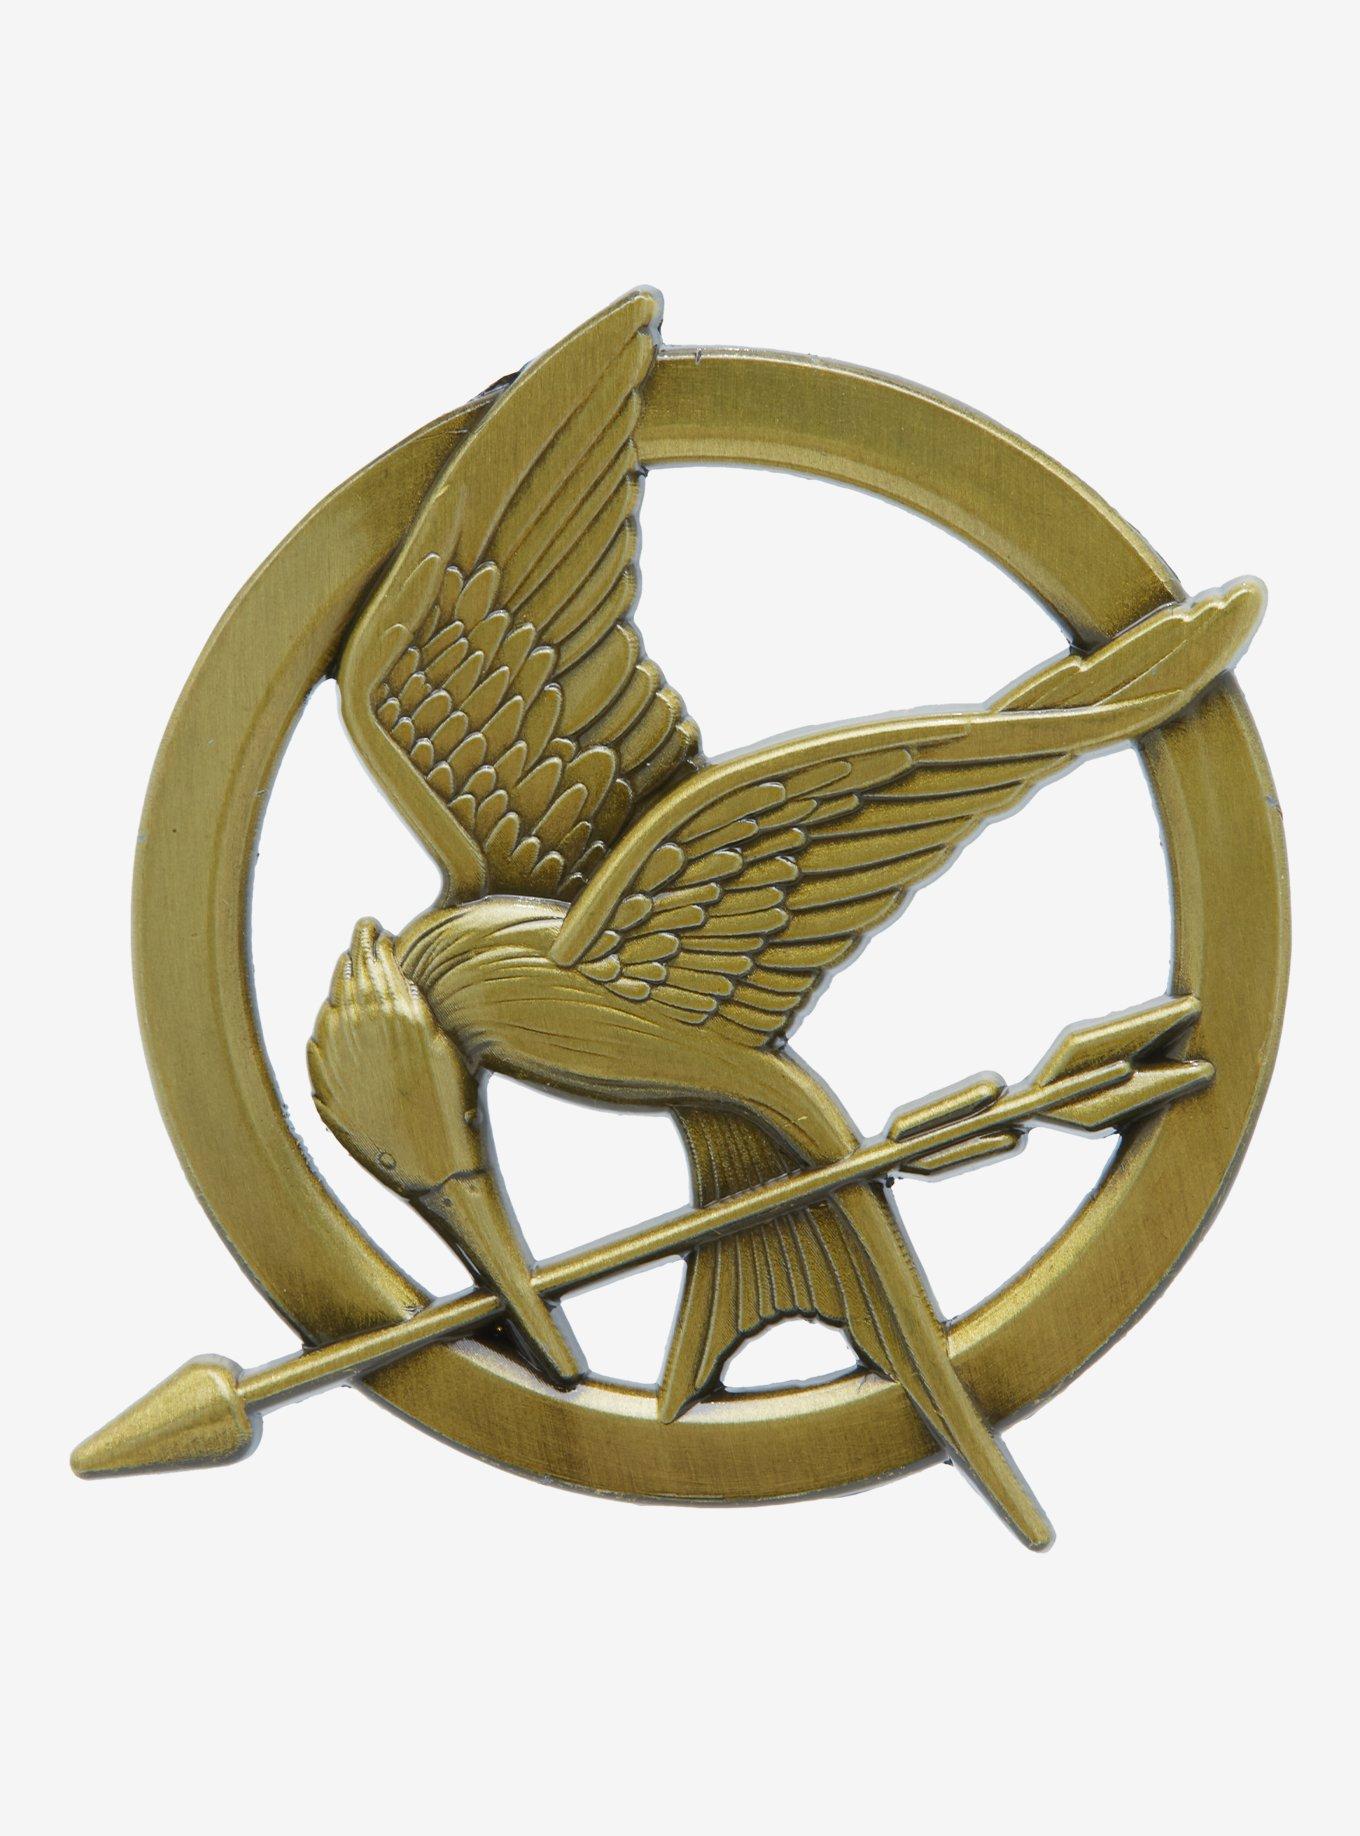 The Hunger Games Replica Mockingjay Pin - BoxLunch Exclusive | BoxLunch